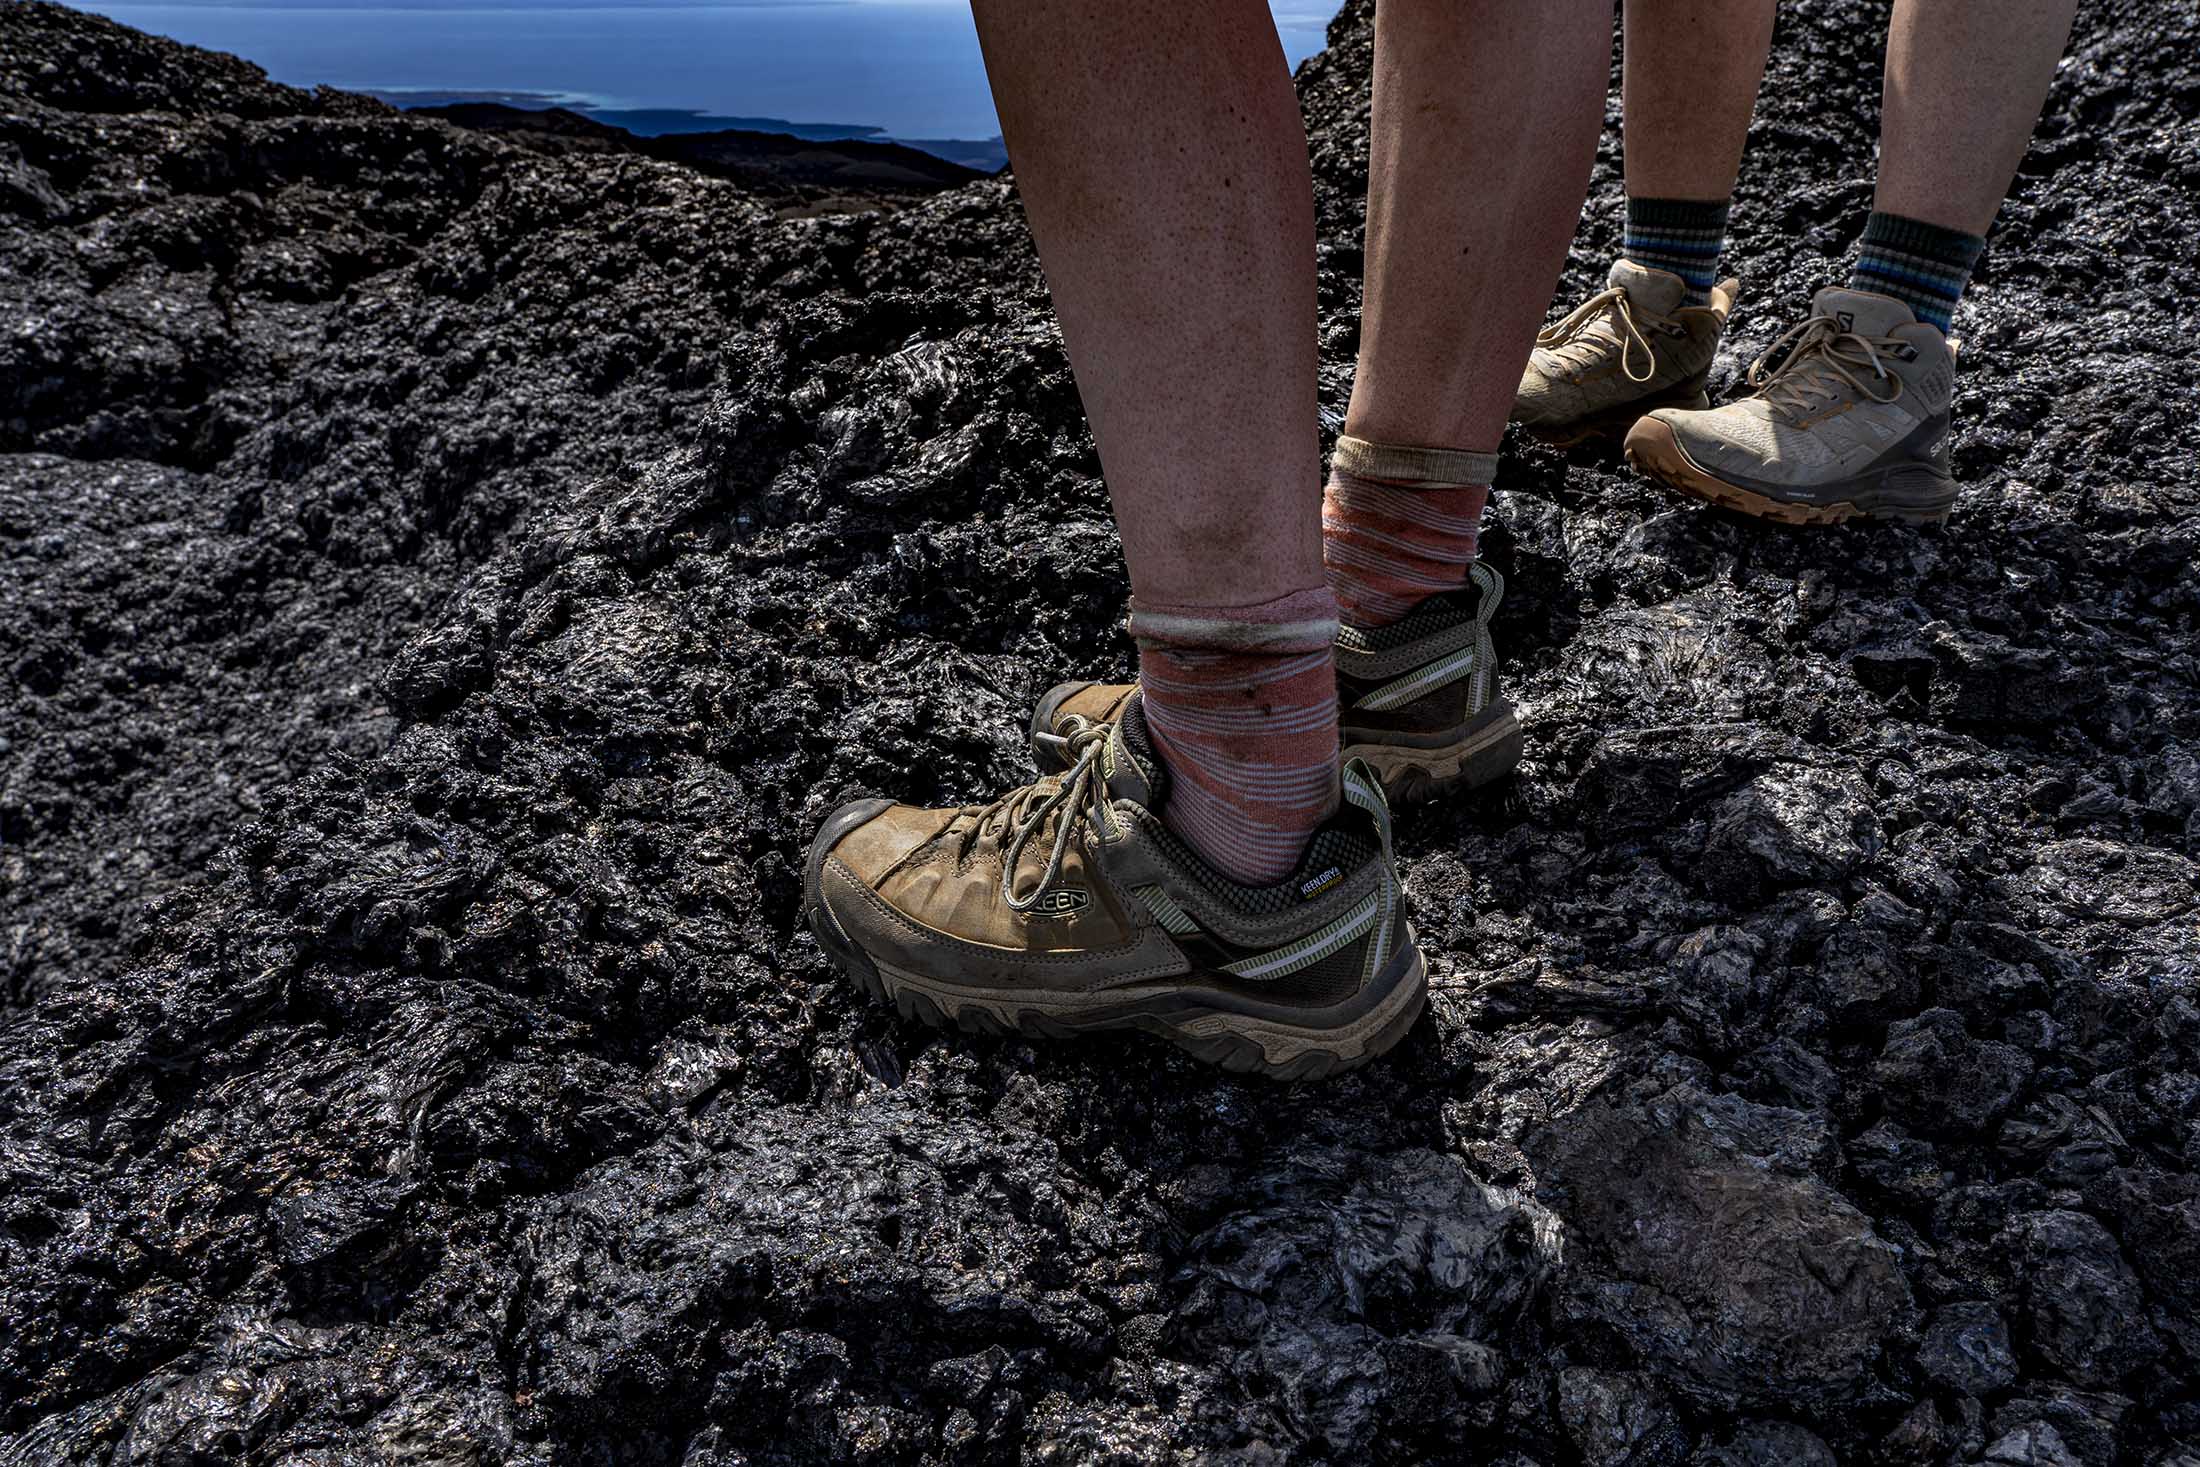 Close up of two people's lower legs standing on craggy rocks. Both are wearing hiking shoes and short striped socks, and have smudges of dirt on their calves as though they've been hiking.